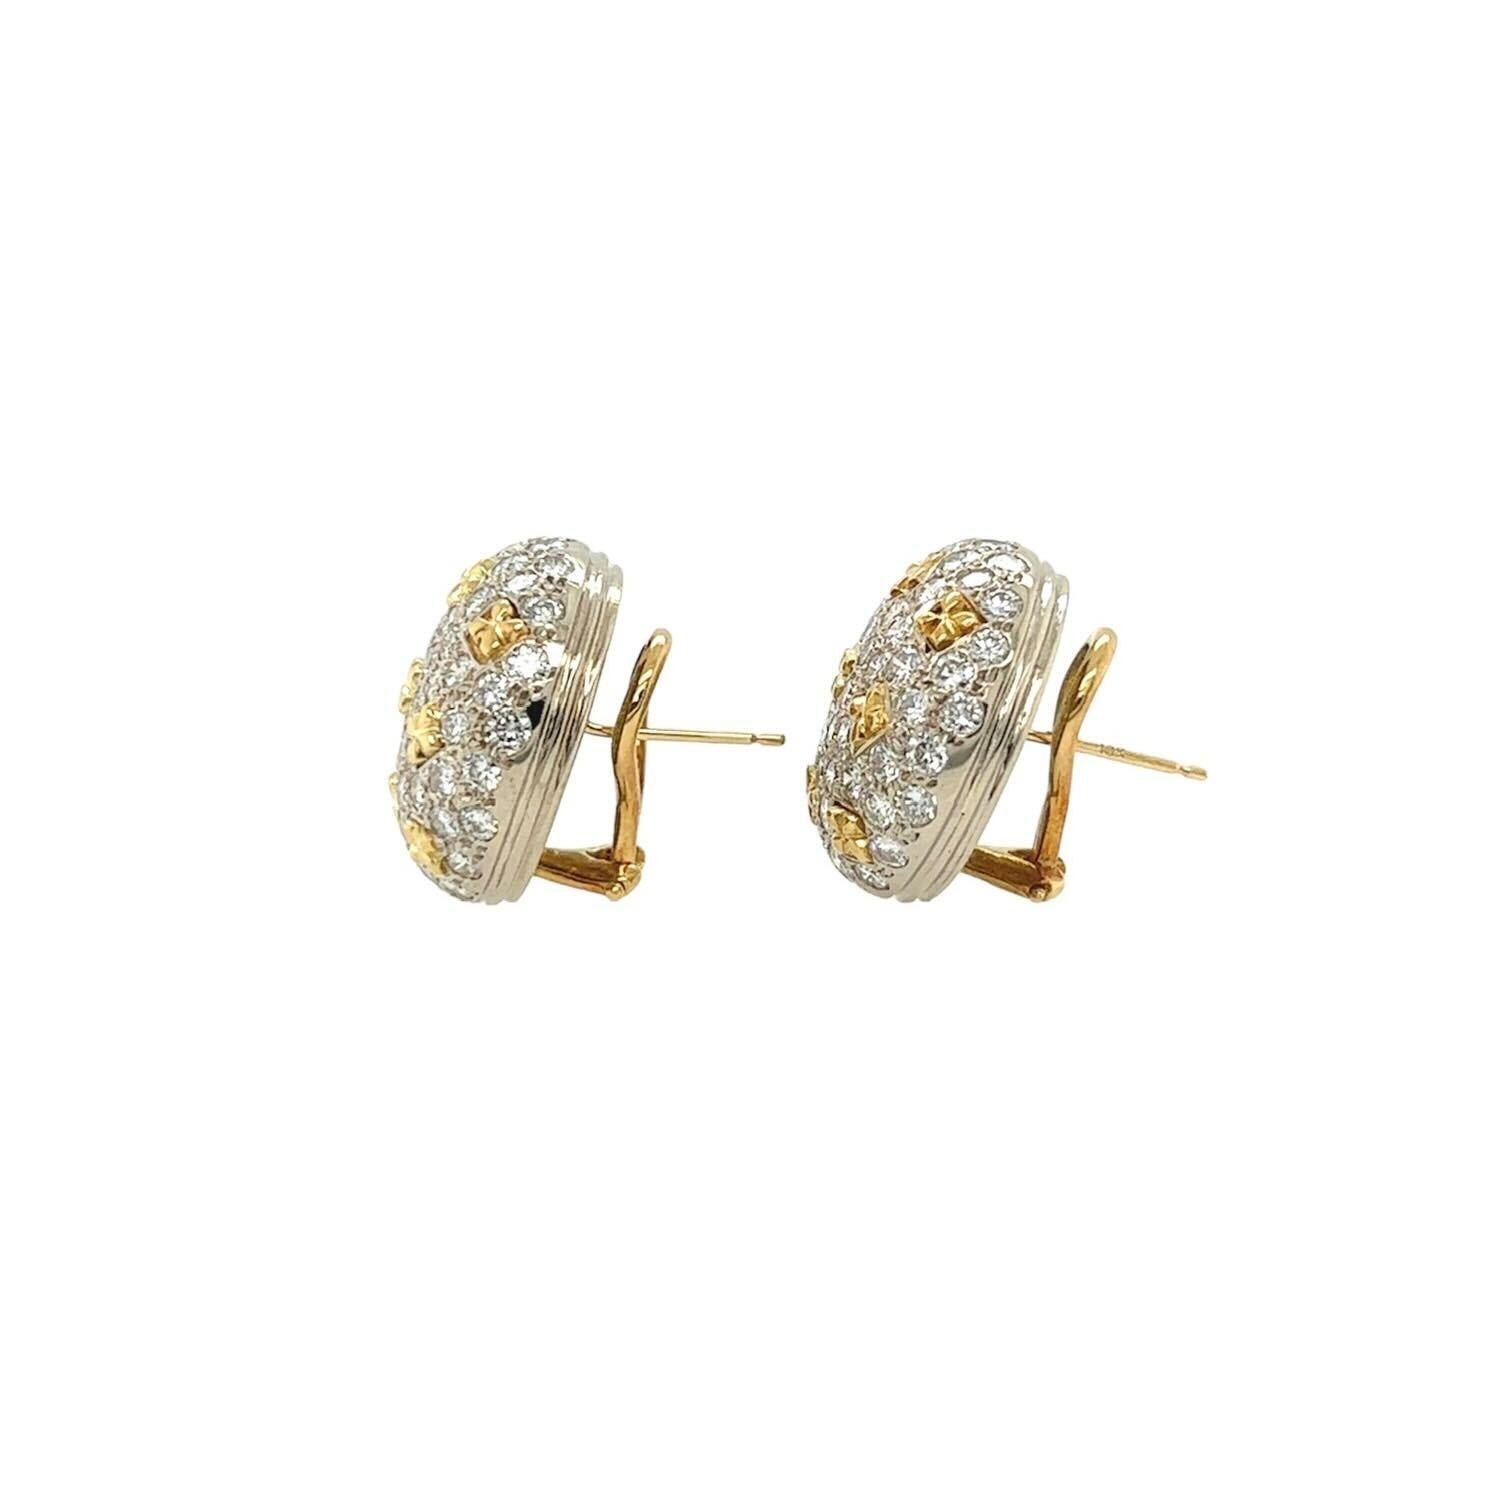 A pair of 18 karat white and yellow gold and diamond earrings.  Each white gold bombe button style earring pave set with approximately fifty seven round brilliant cut diamonds punctuated with nine yellow gold quatrefoils in three rows.  Total